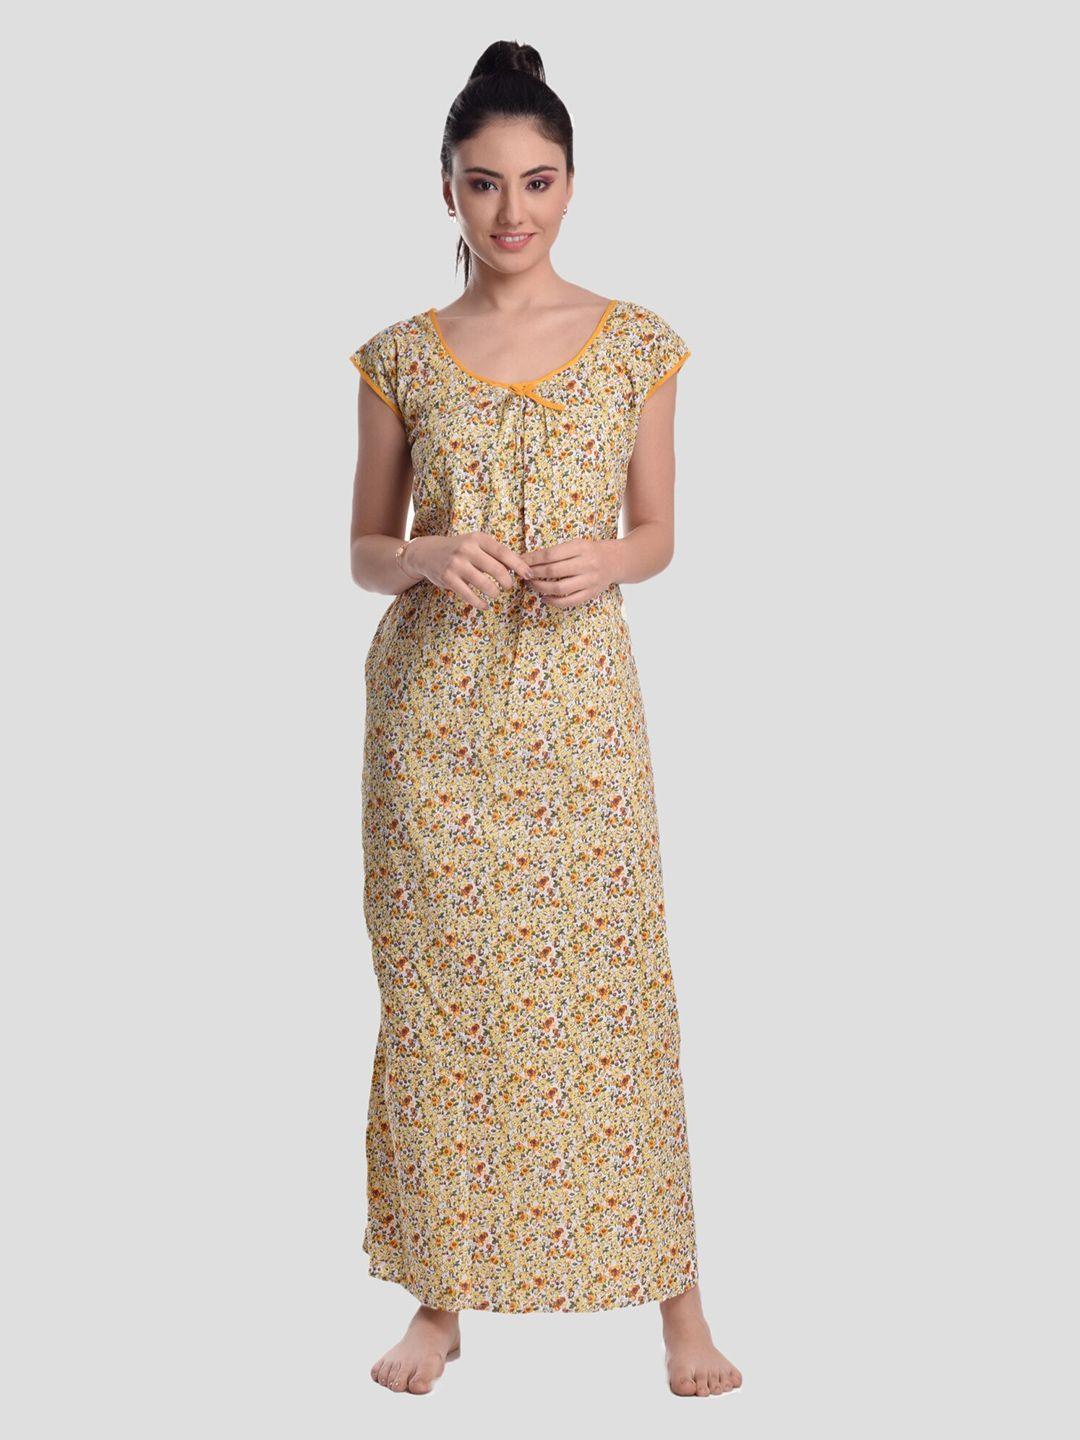 cierge-yellow-&-white-floral-printed-pure-cotton-maxi-nightdress